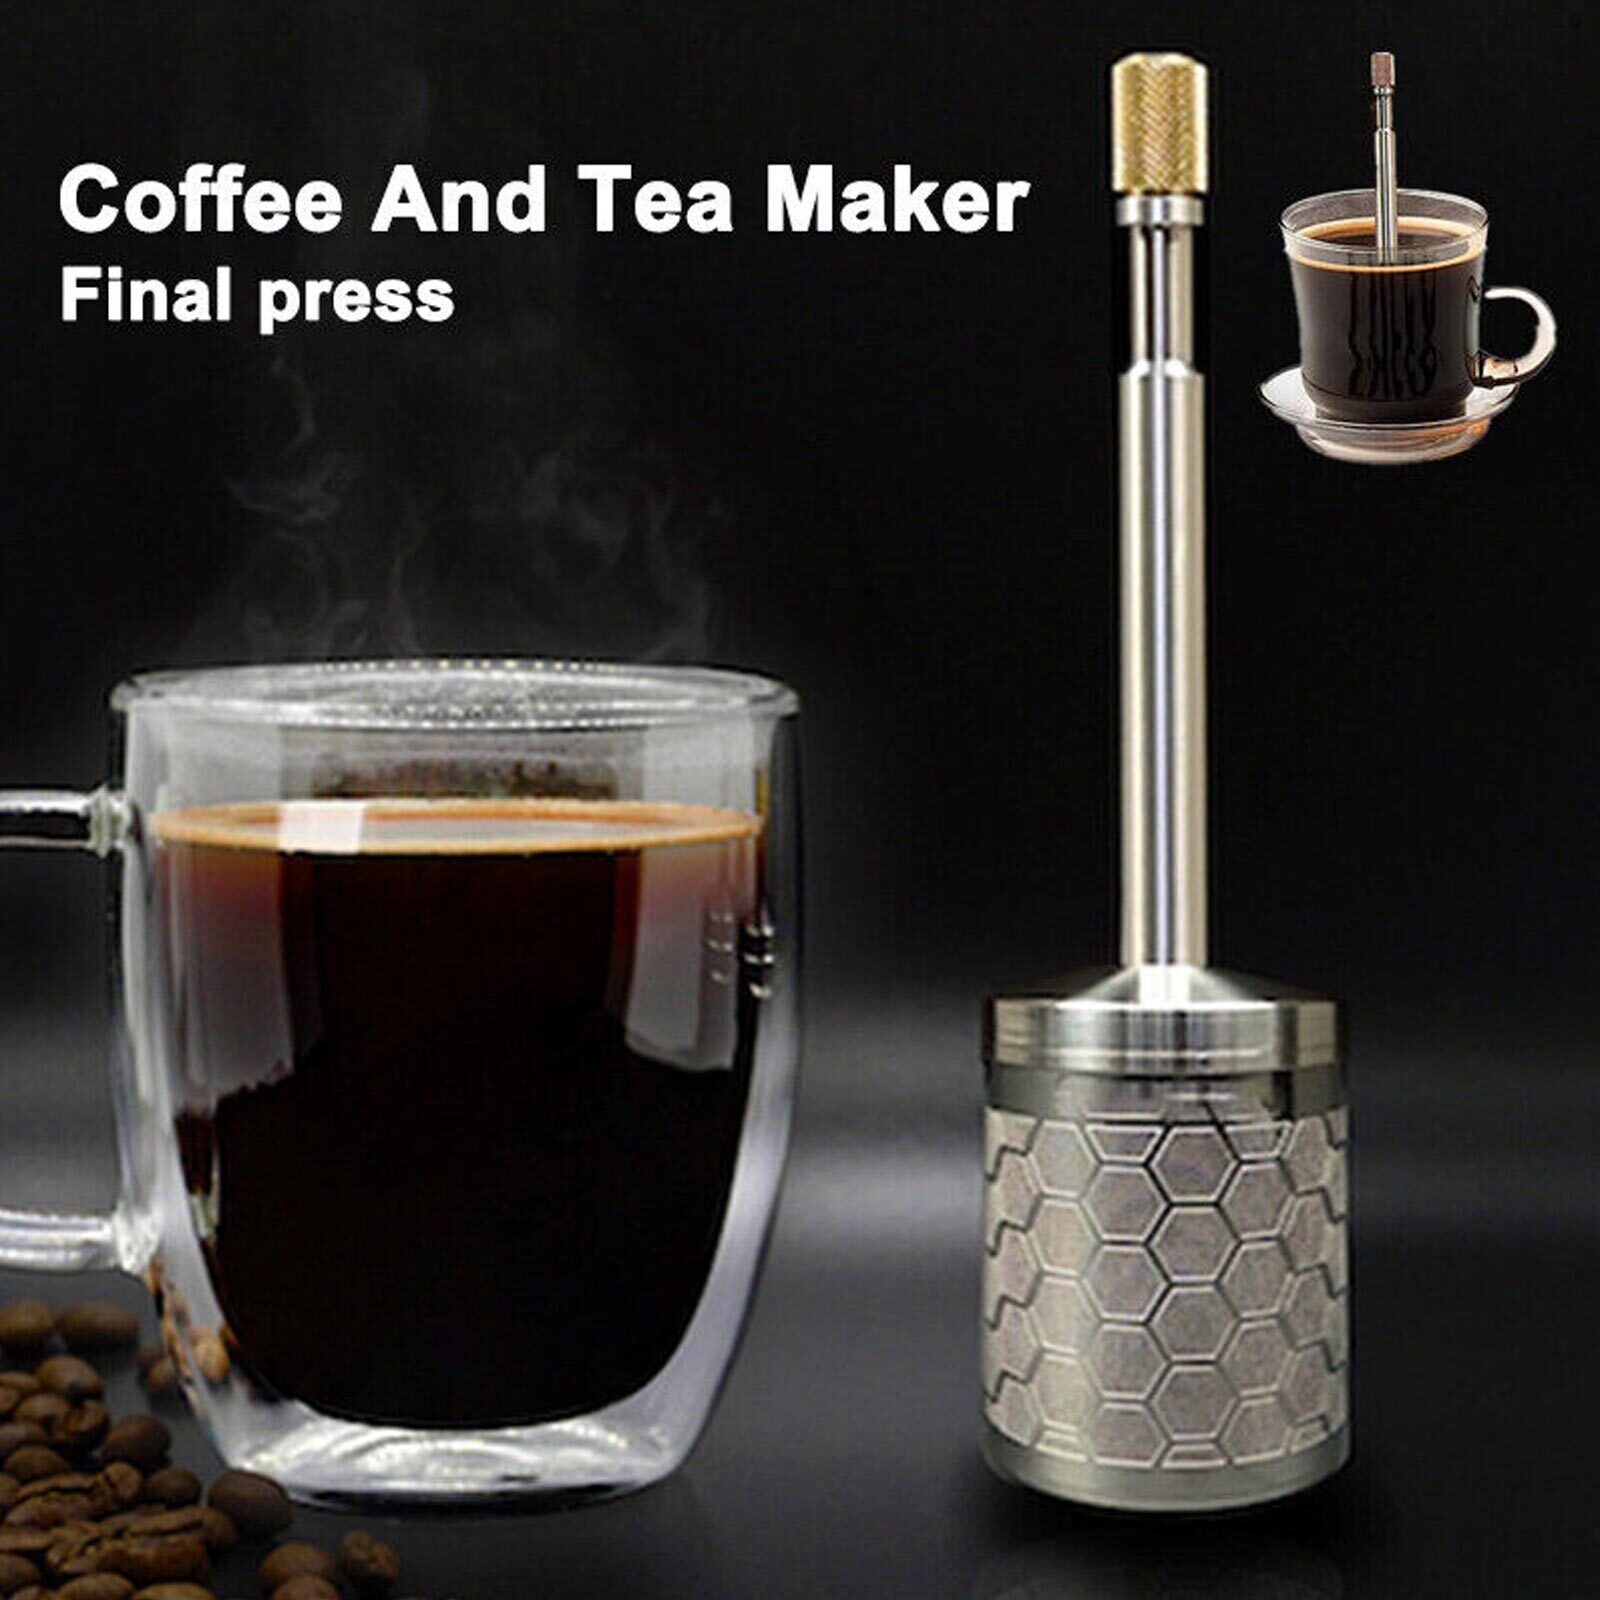 Portable Travel Coffee Brewer Final press Reusable Coffee Filter Coffee Maker